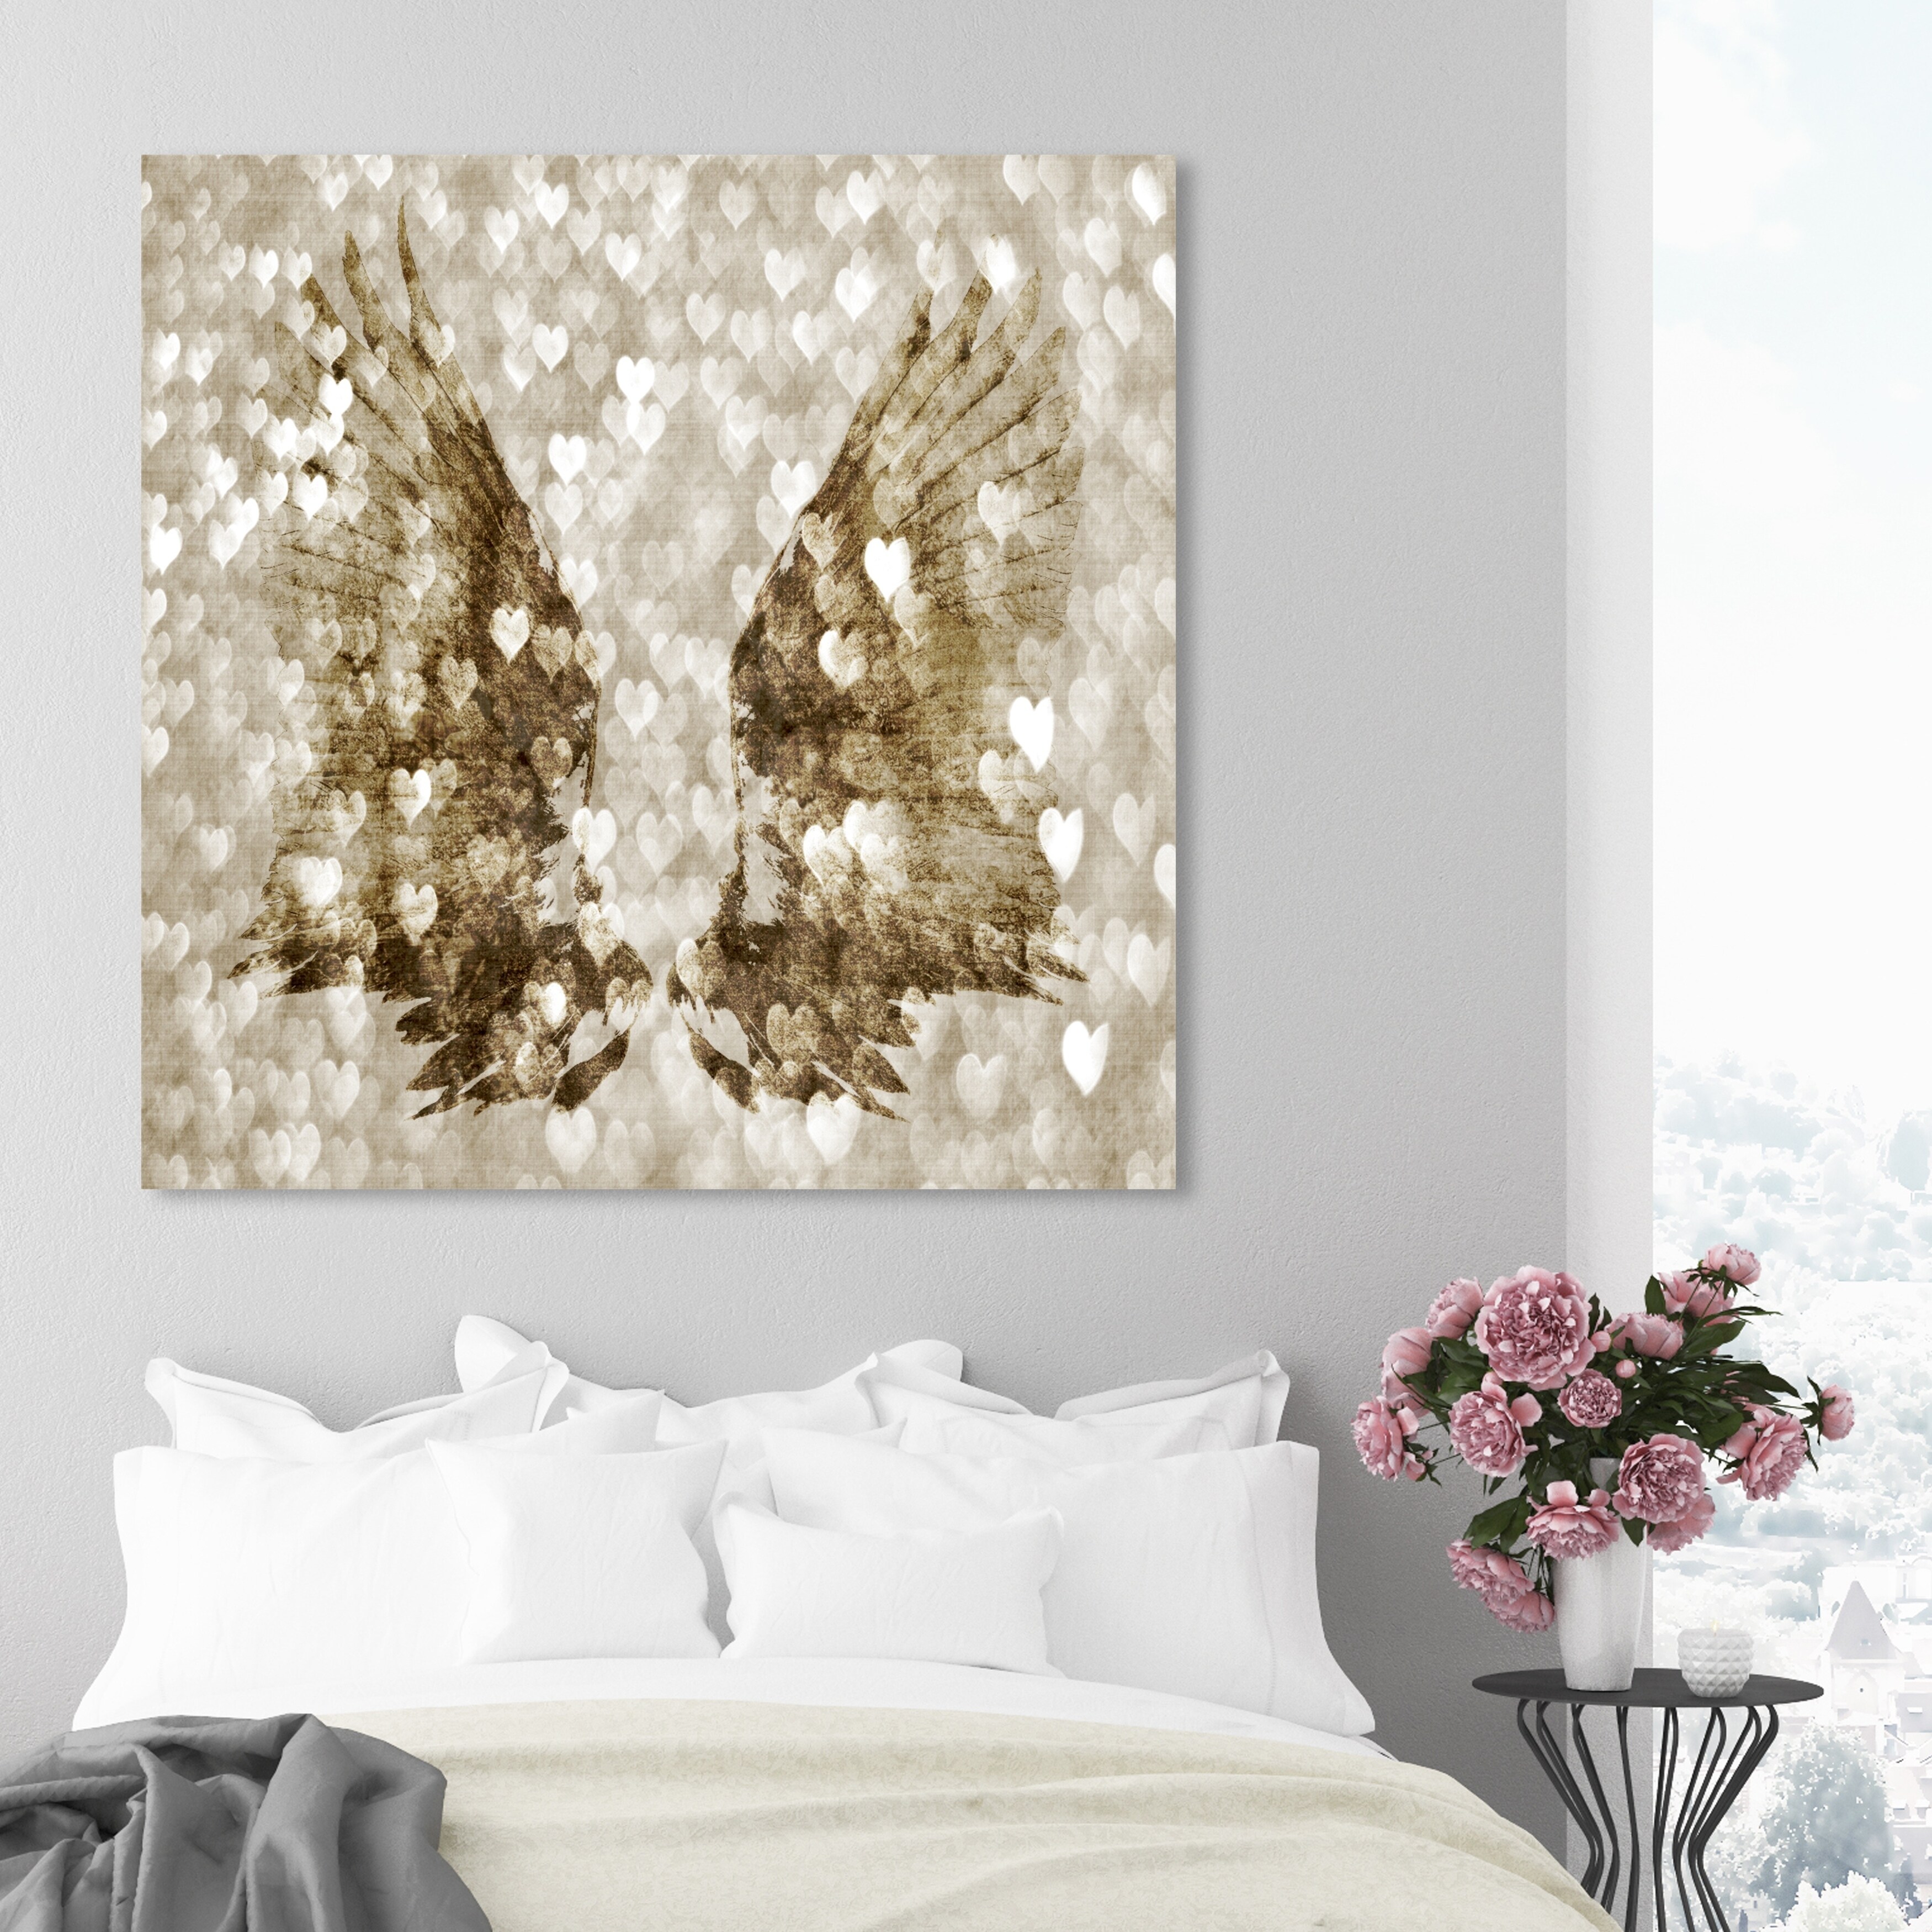 Wynwood Studio Prints Fashion and Glam Golden Fall Butterflies Gold and Metallic Gold Glam Wall Art Canvas Print - Black